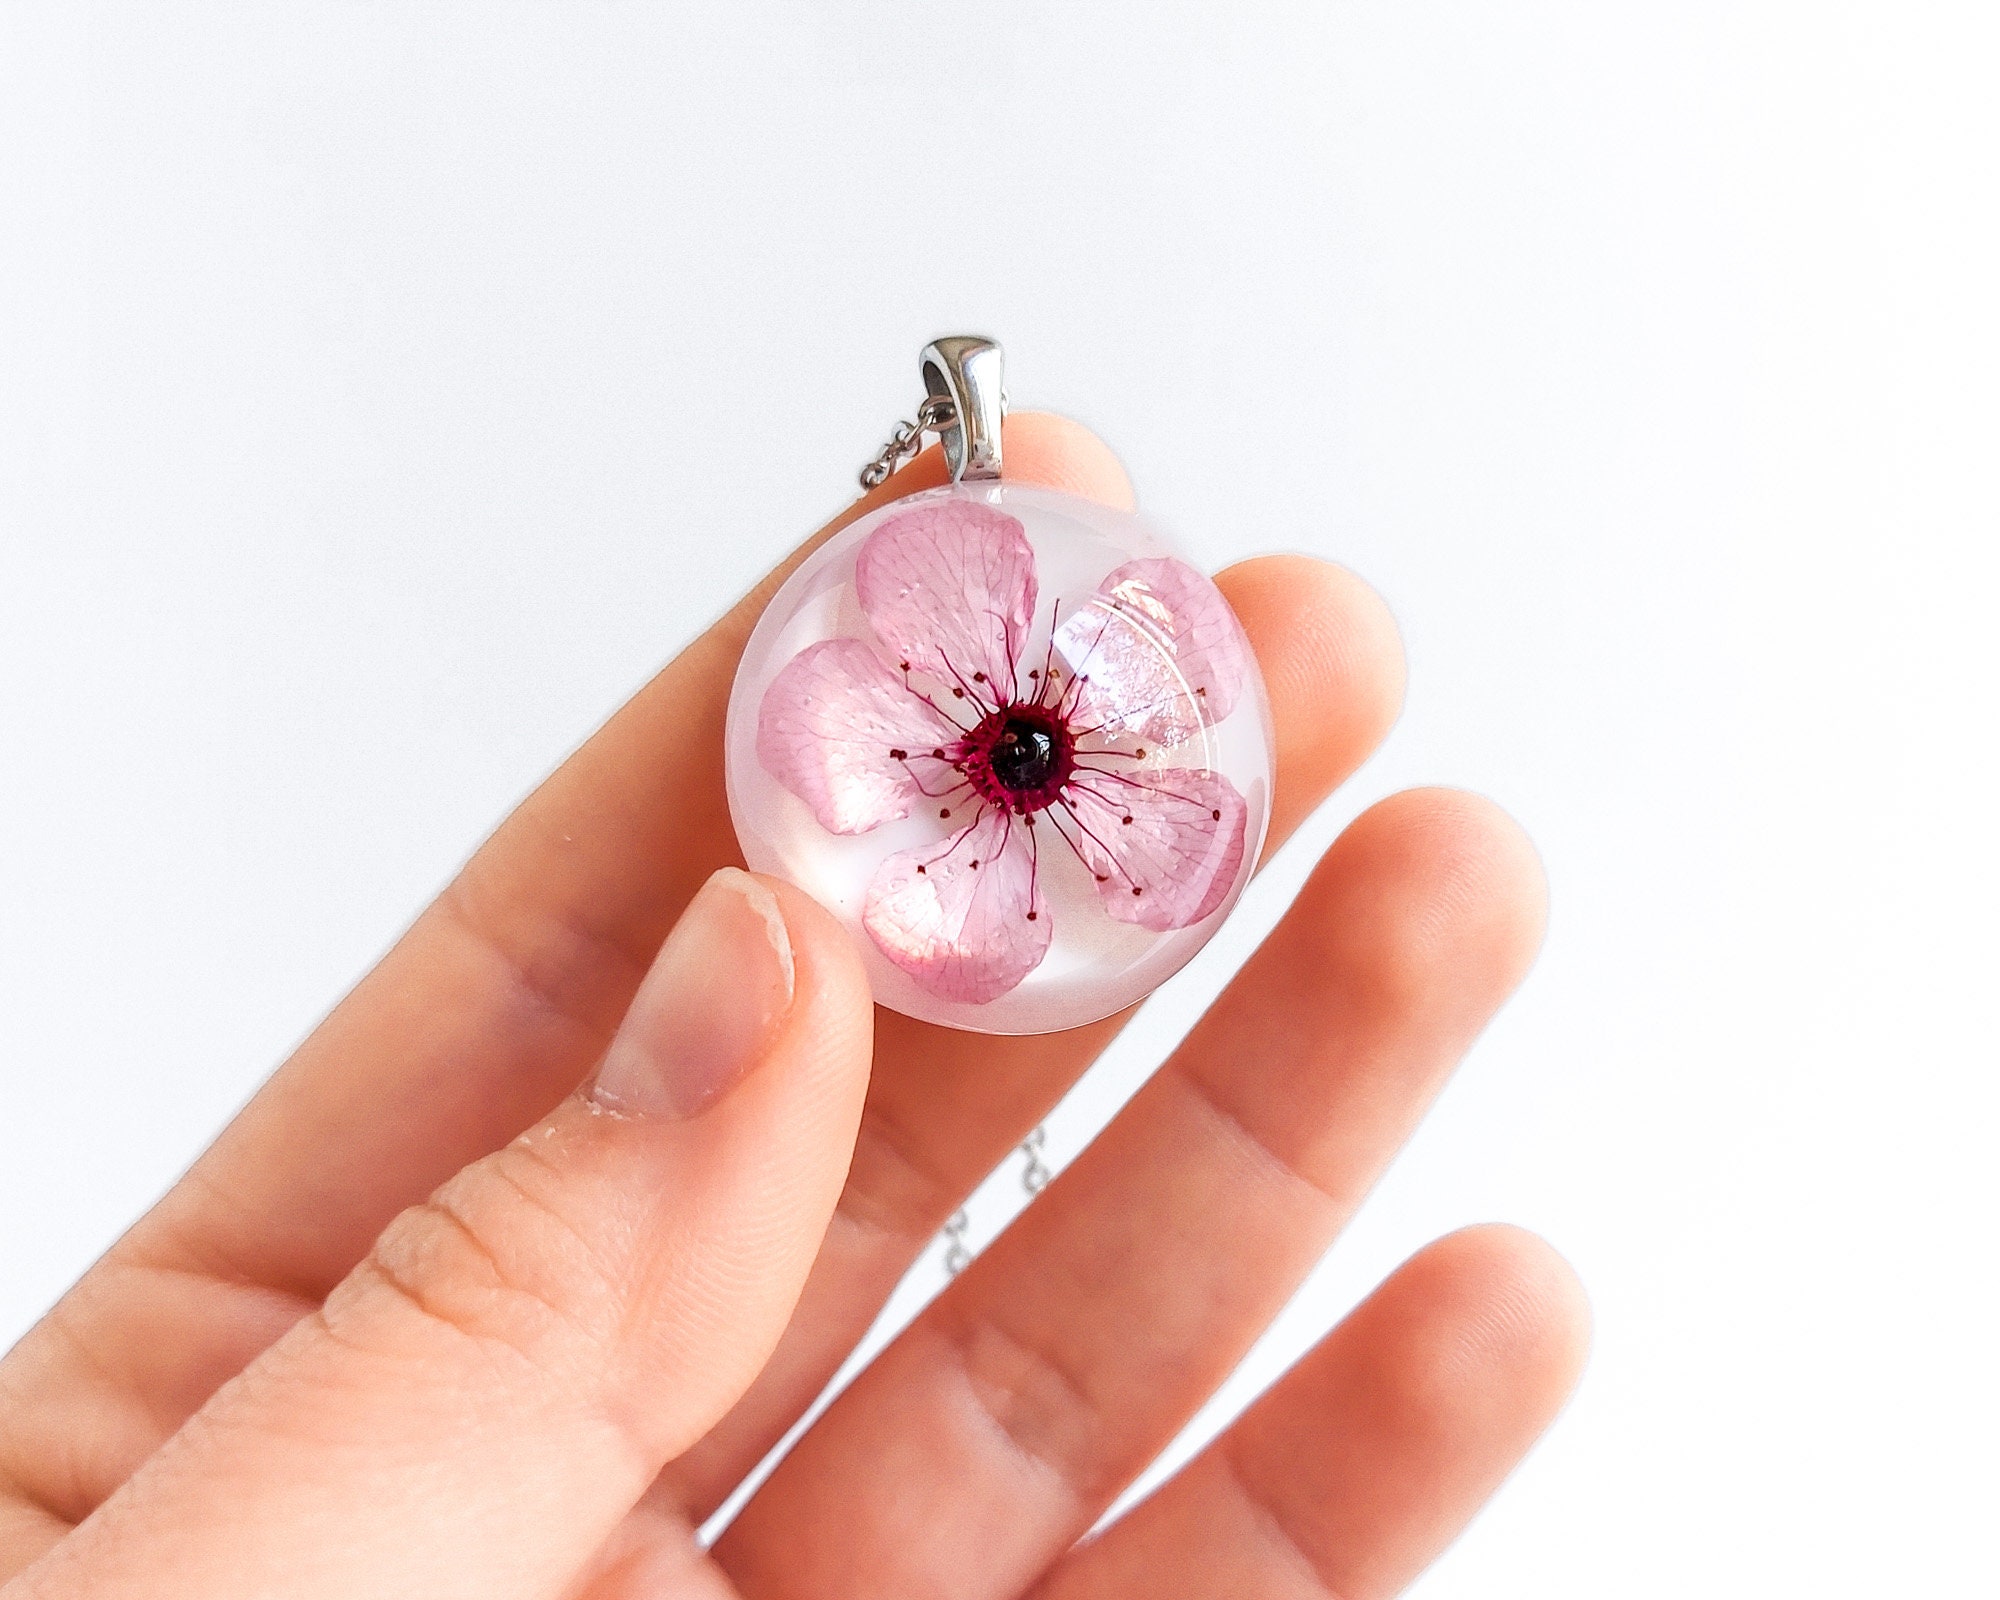 KitBeads 100pcs Cherry Blossom Flower Charms Enamel Little Flower Charms  Mini Flower Dangle Charms for Jewelry Making Necklace